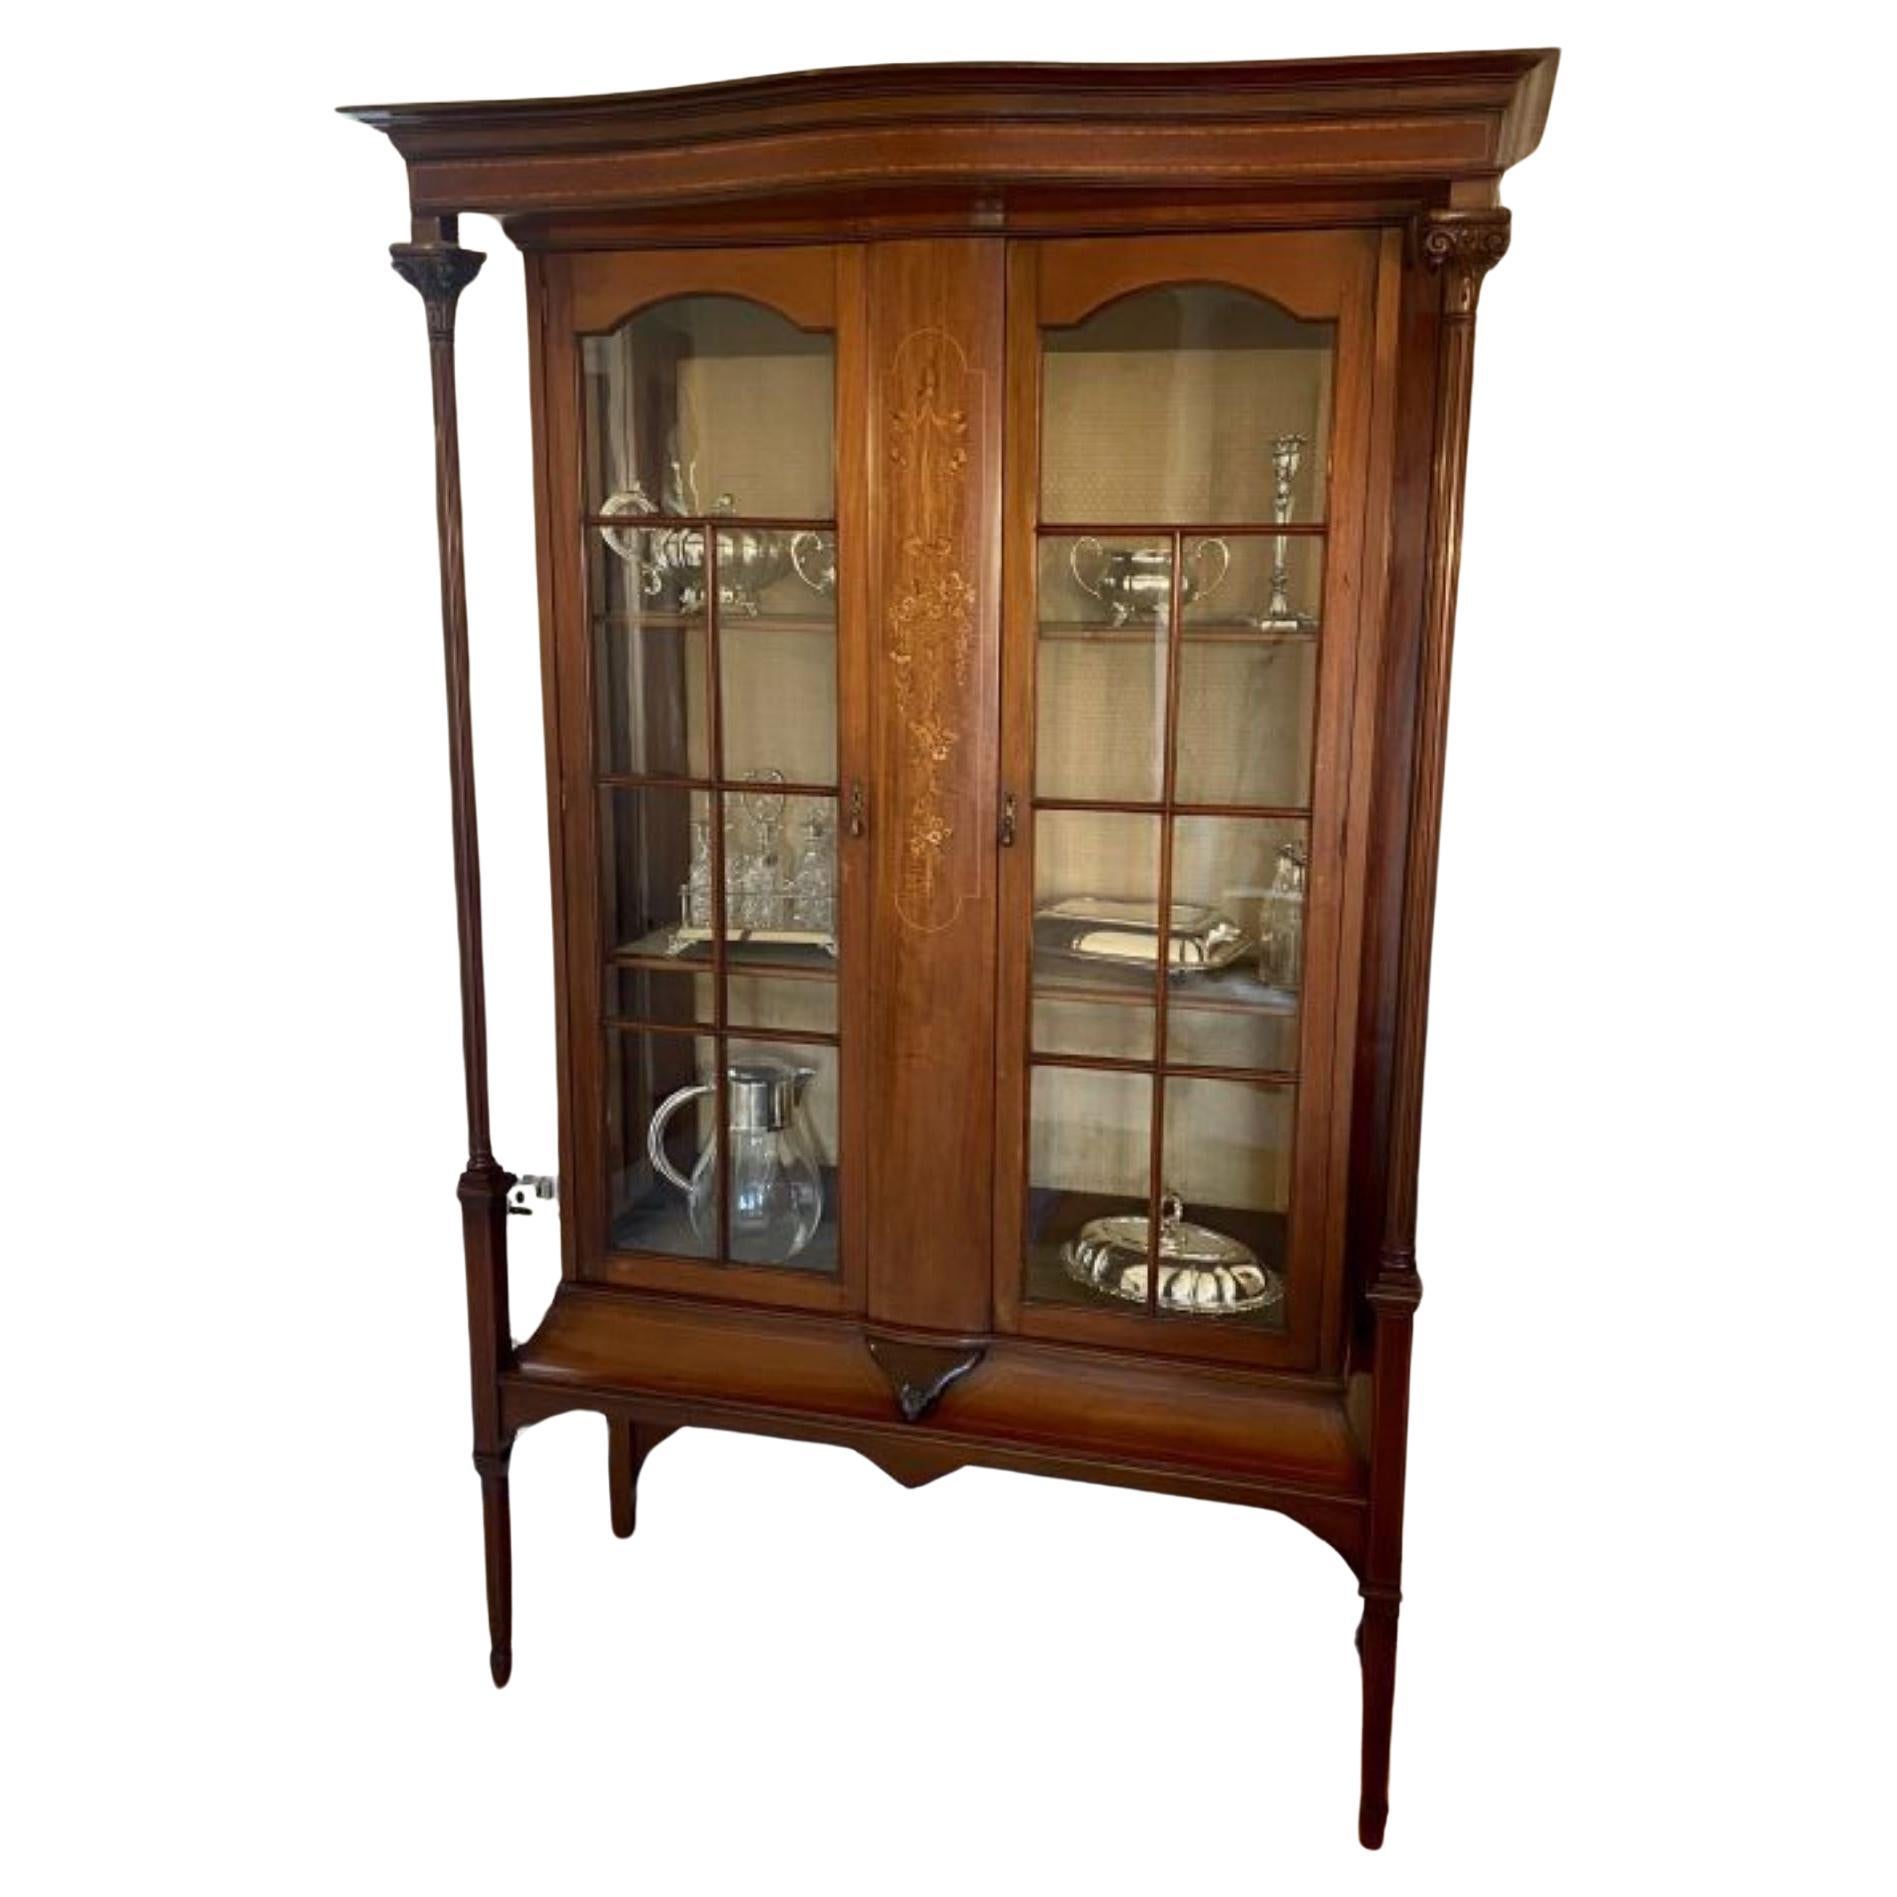 Quality antique Edwardian mahogany inlaid display cabinet For Sale